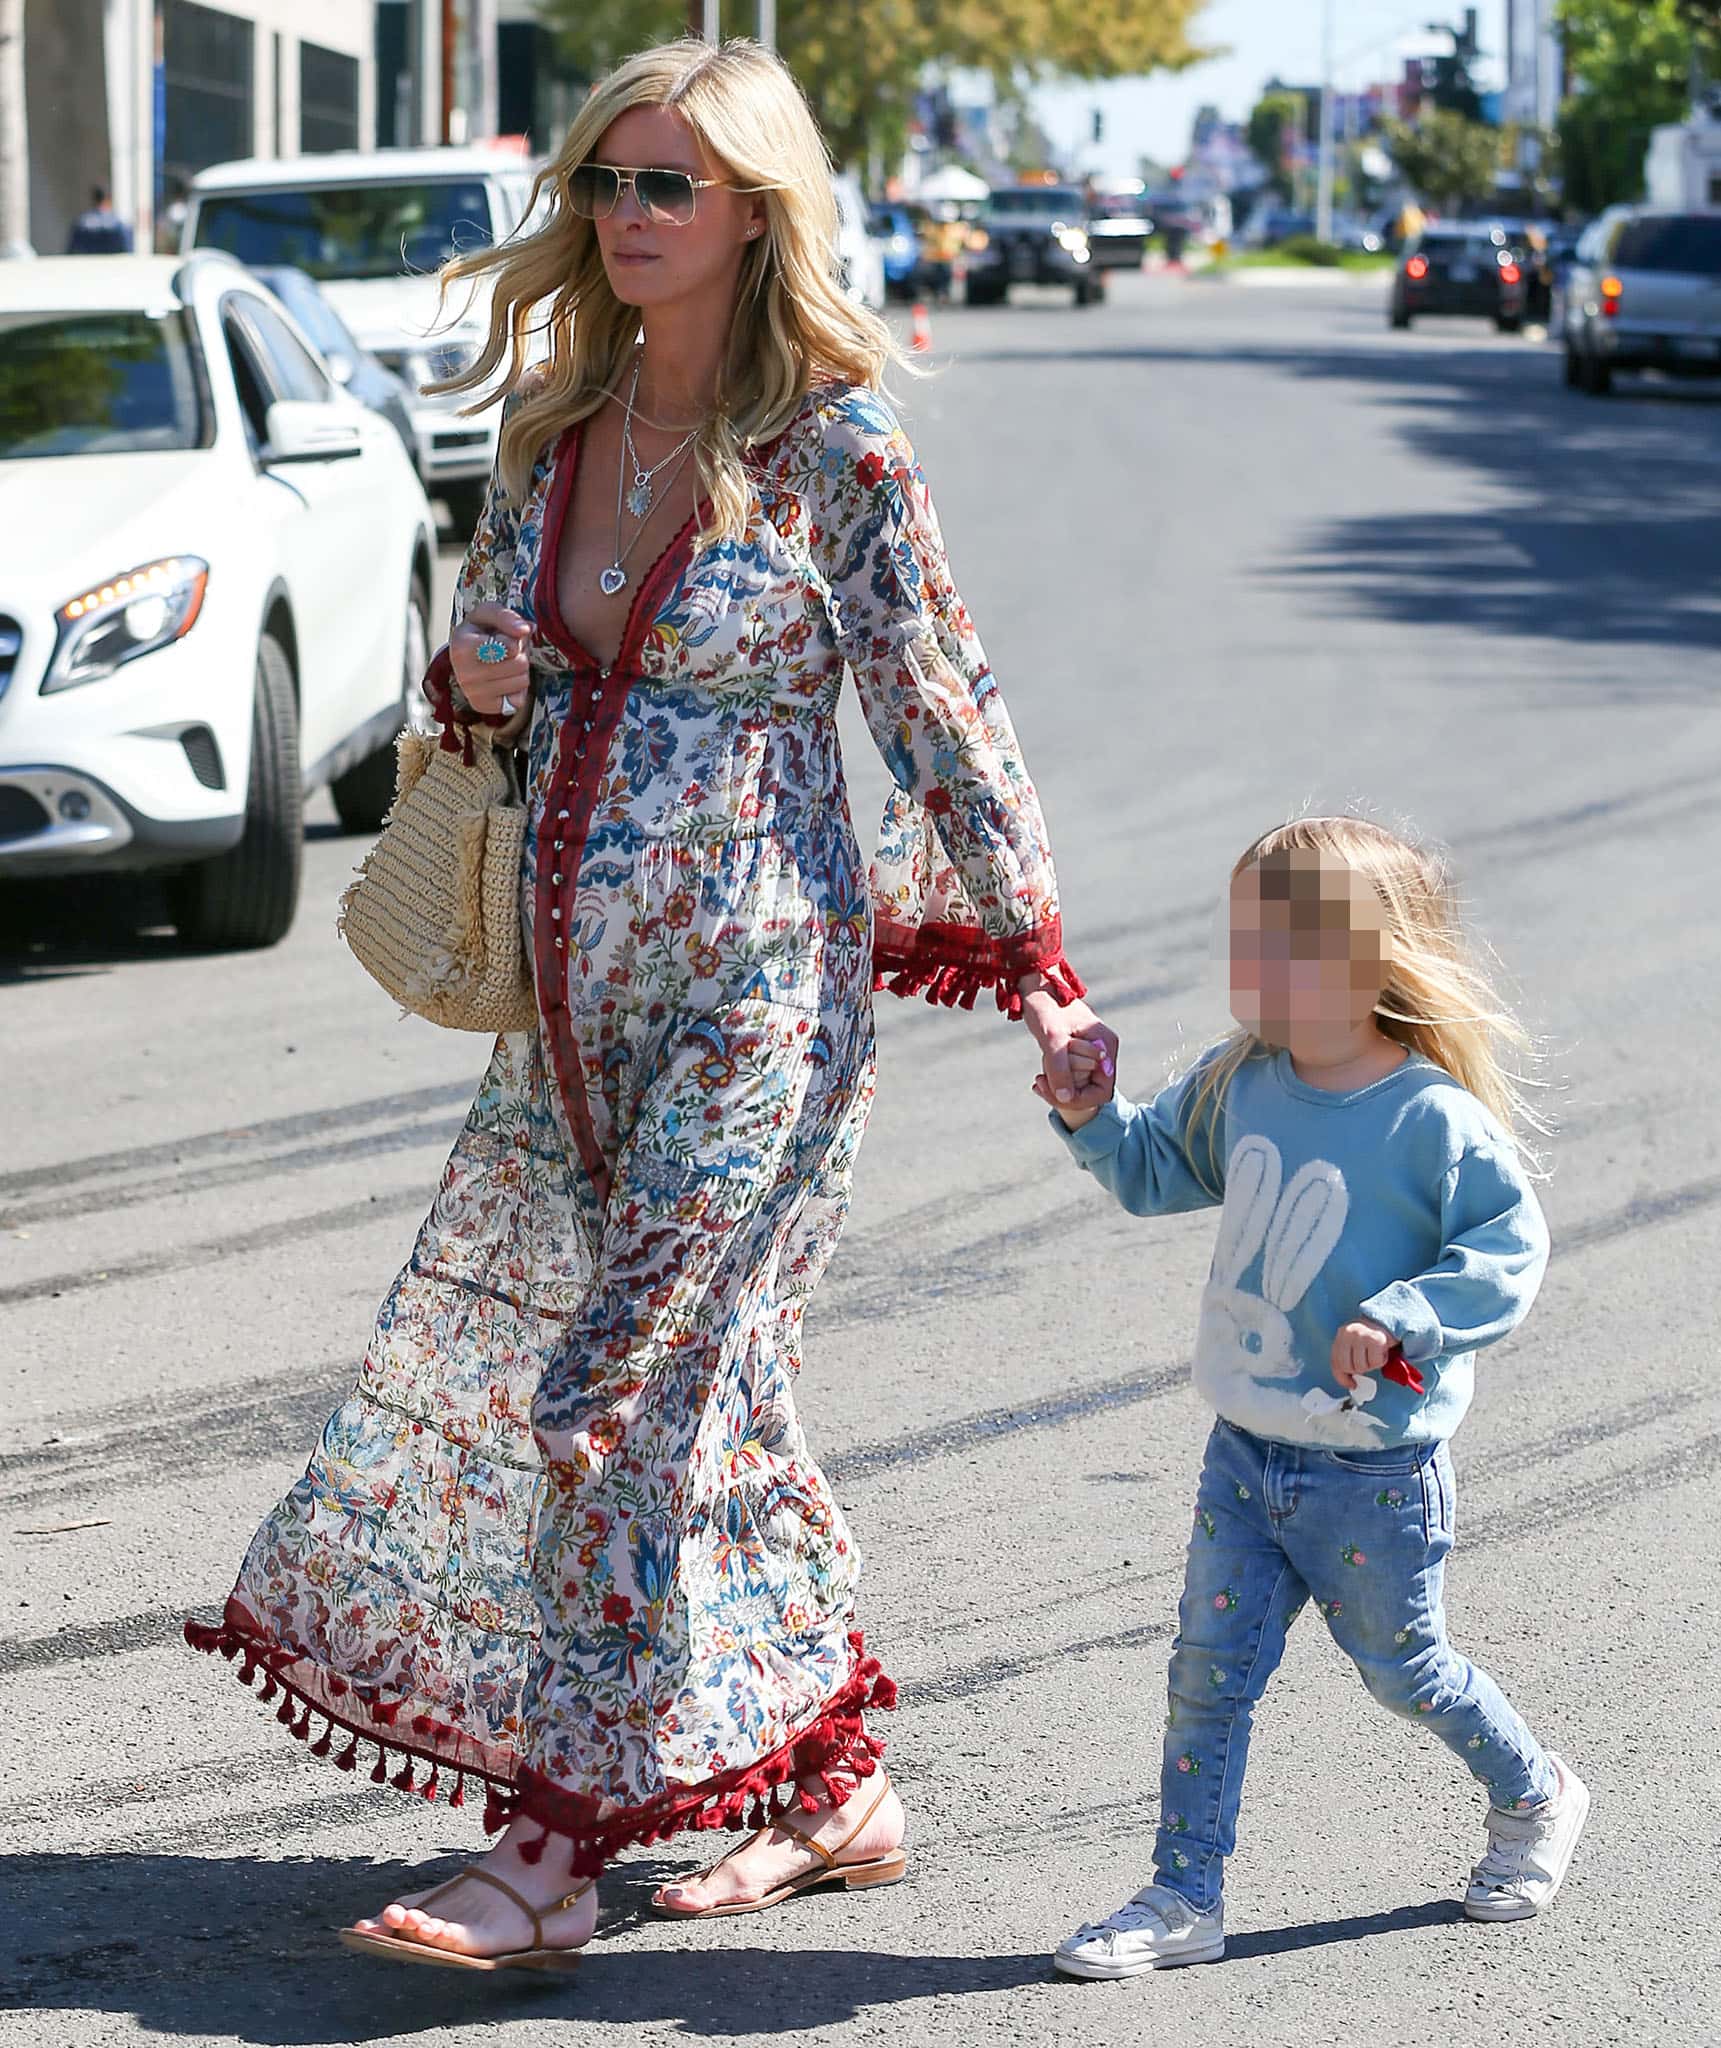 Pregnant Nicky Hilton out and about with her daughter, Teddy, in Los Angeles on February 24, 2022